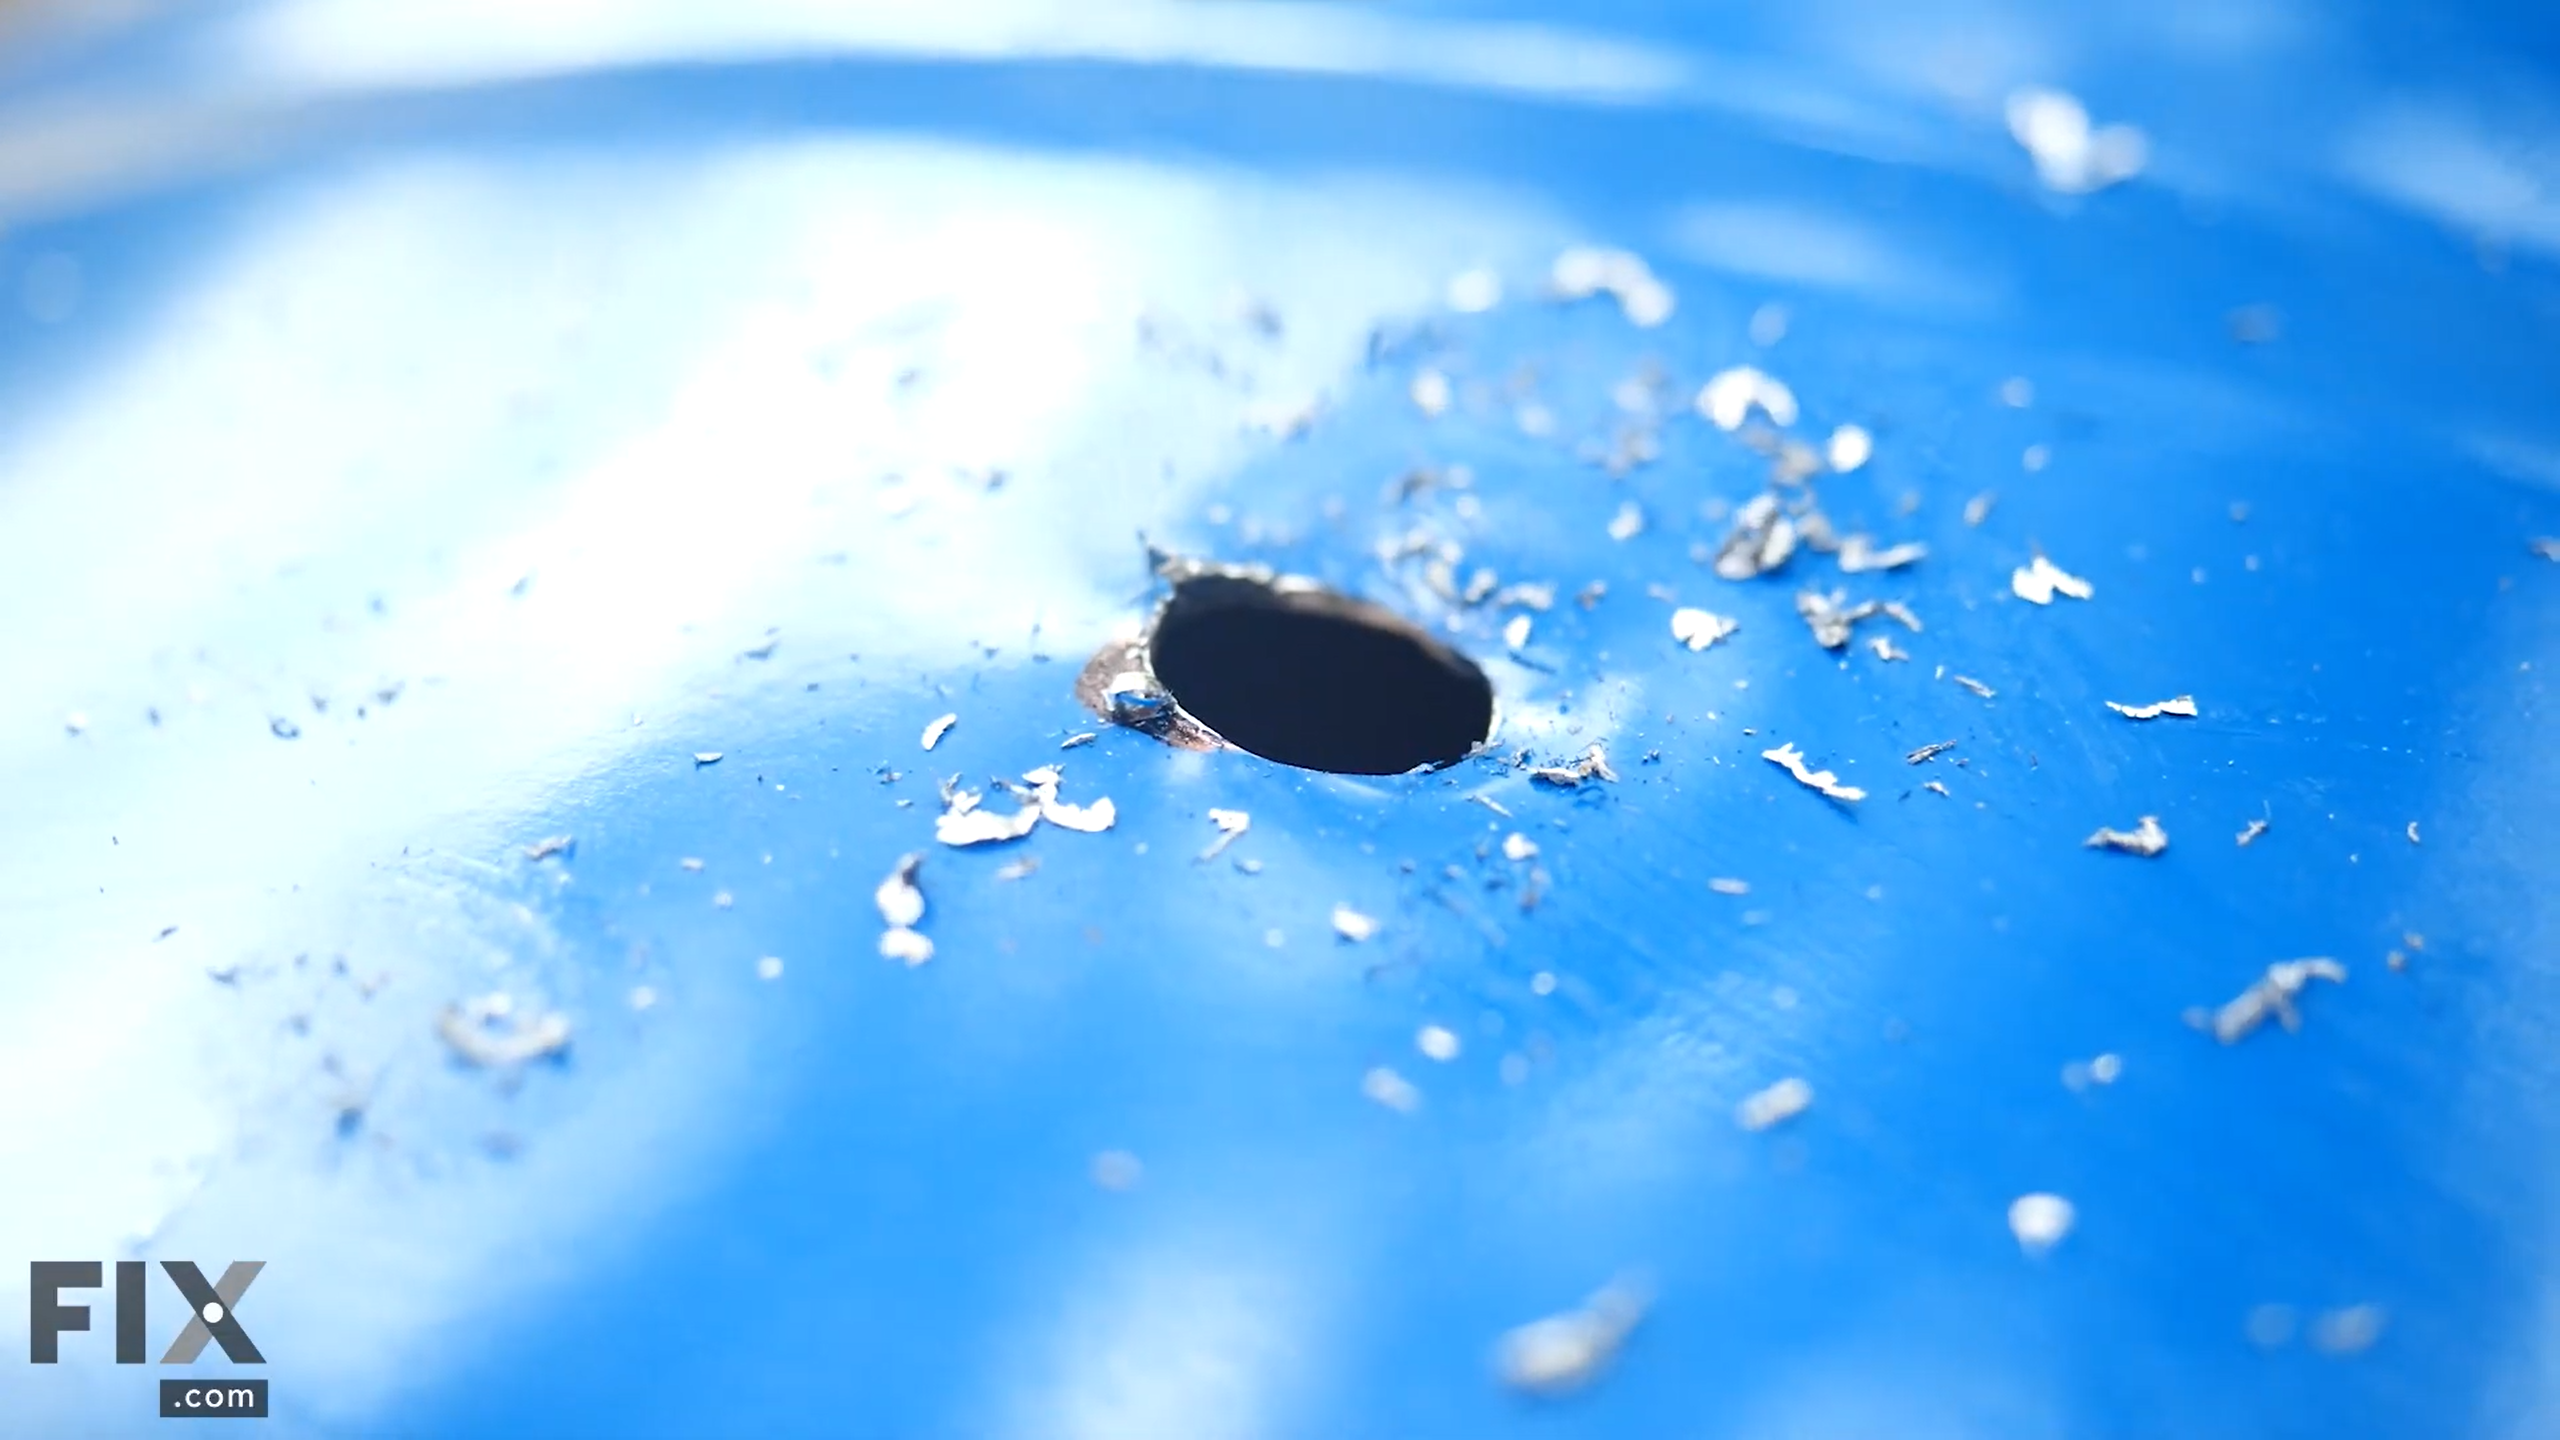 Hole drilled into a metal surface.